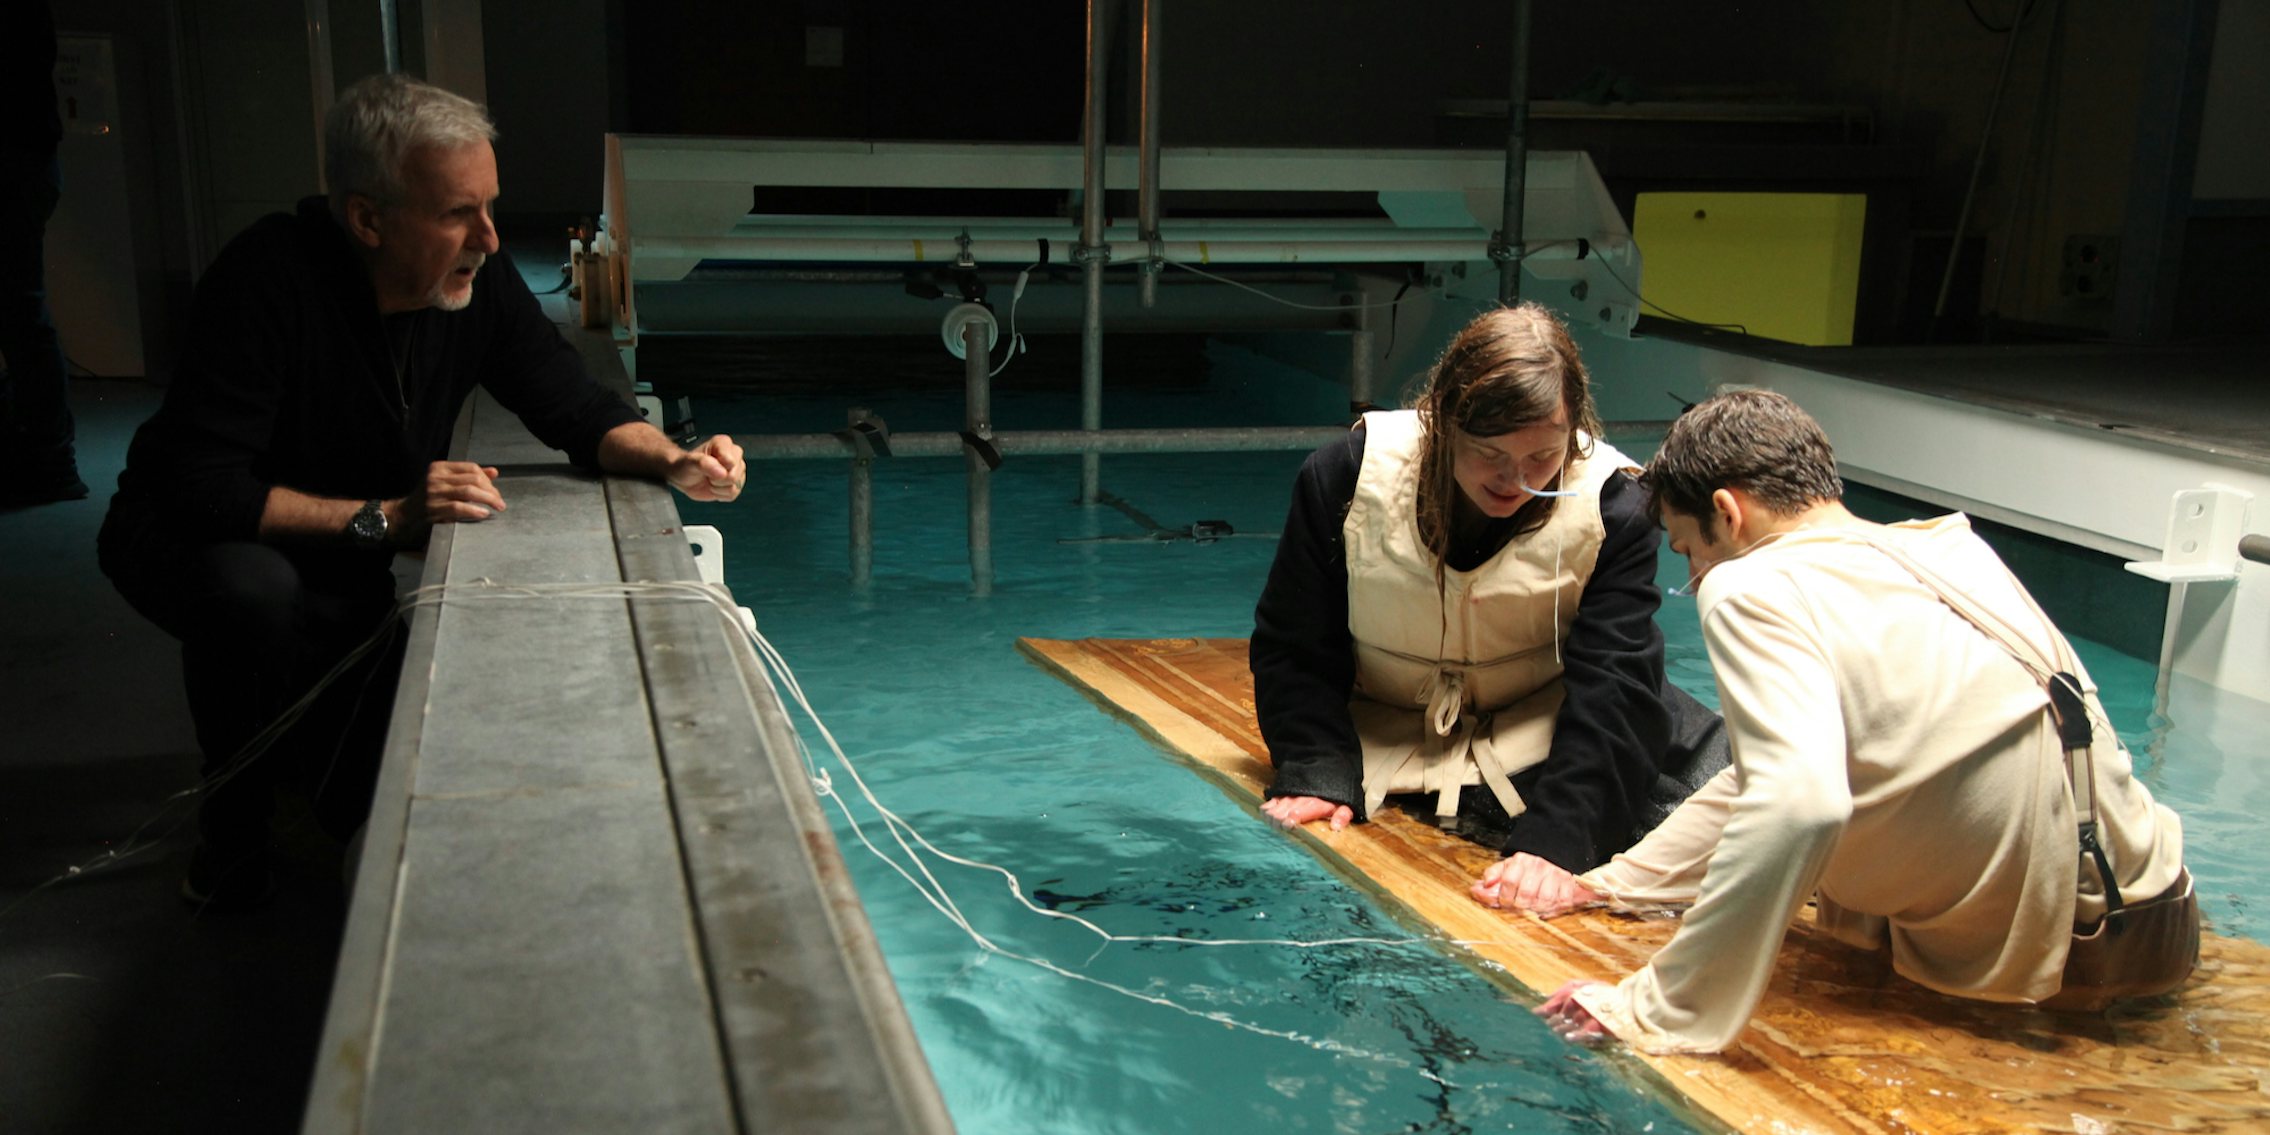 james cameron (left) with kristine zipfel and josh bird (who are recreating the floating debris scene from titanic in an experiment, in titanic 25 years later with james cameron